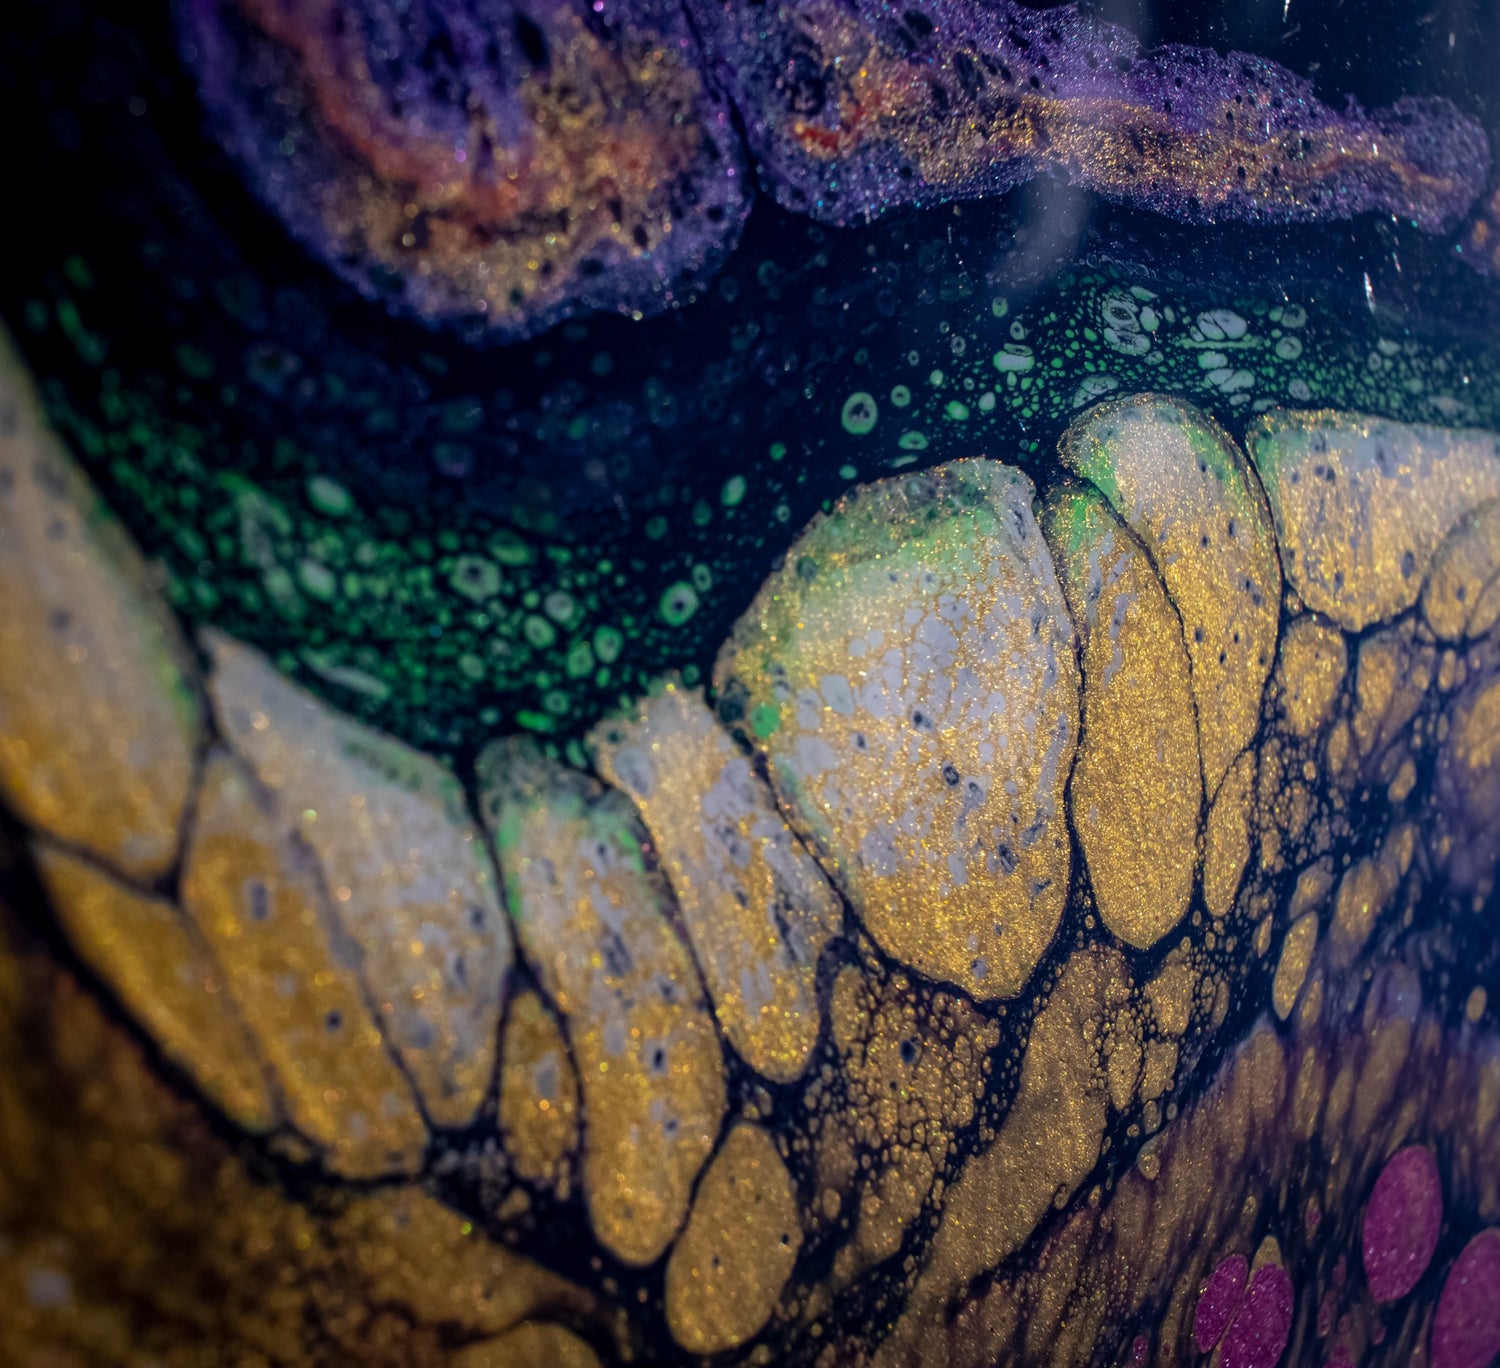 A close-up view of the blacklight fluorescent acrylic pour painting "A Galaxy of Metal"